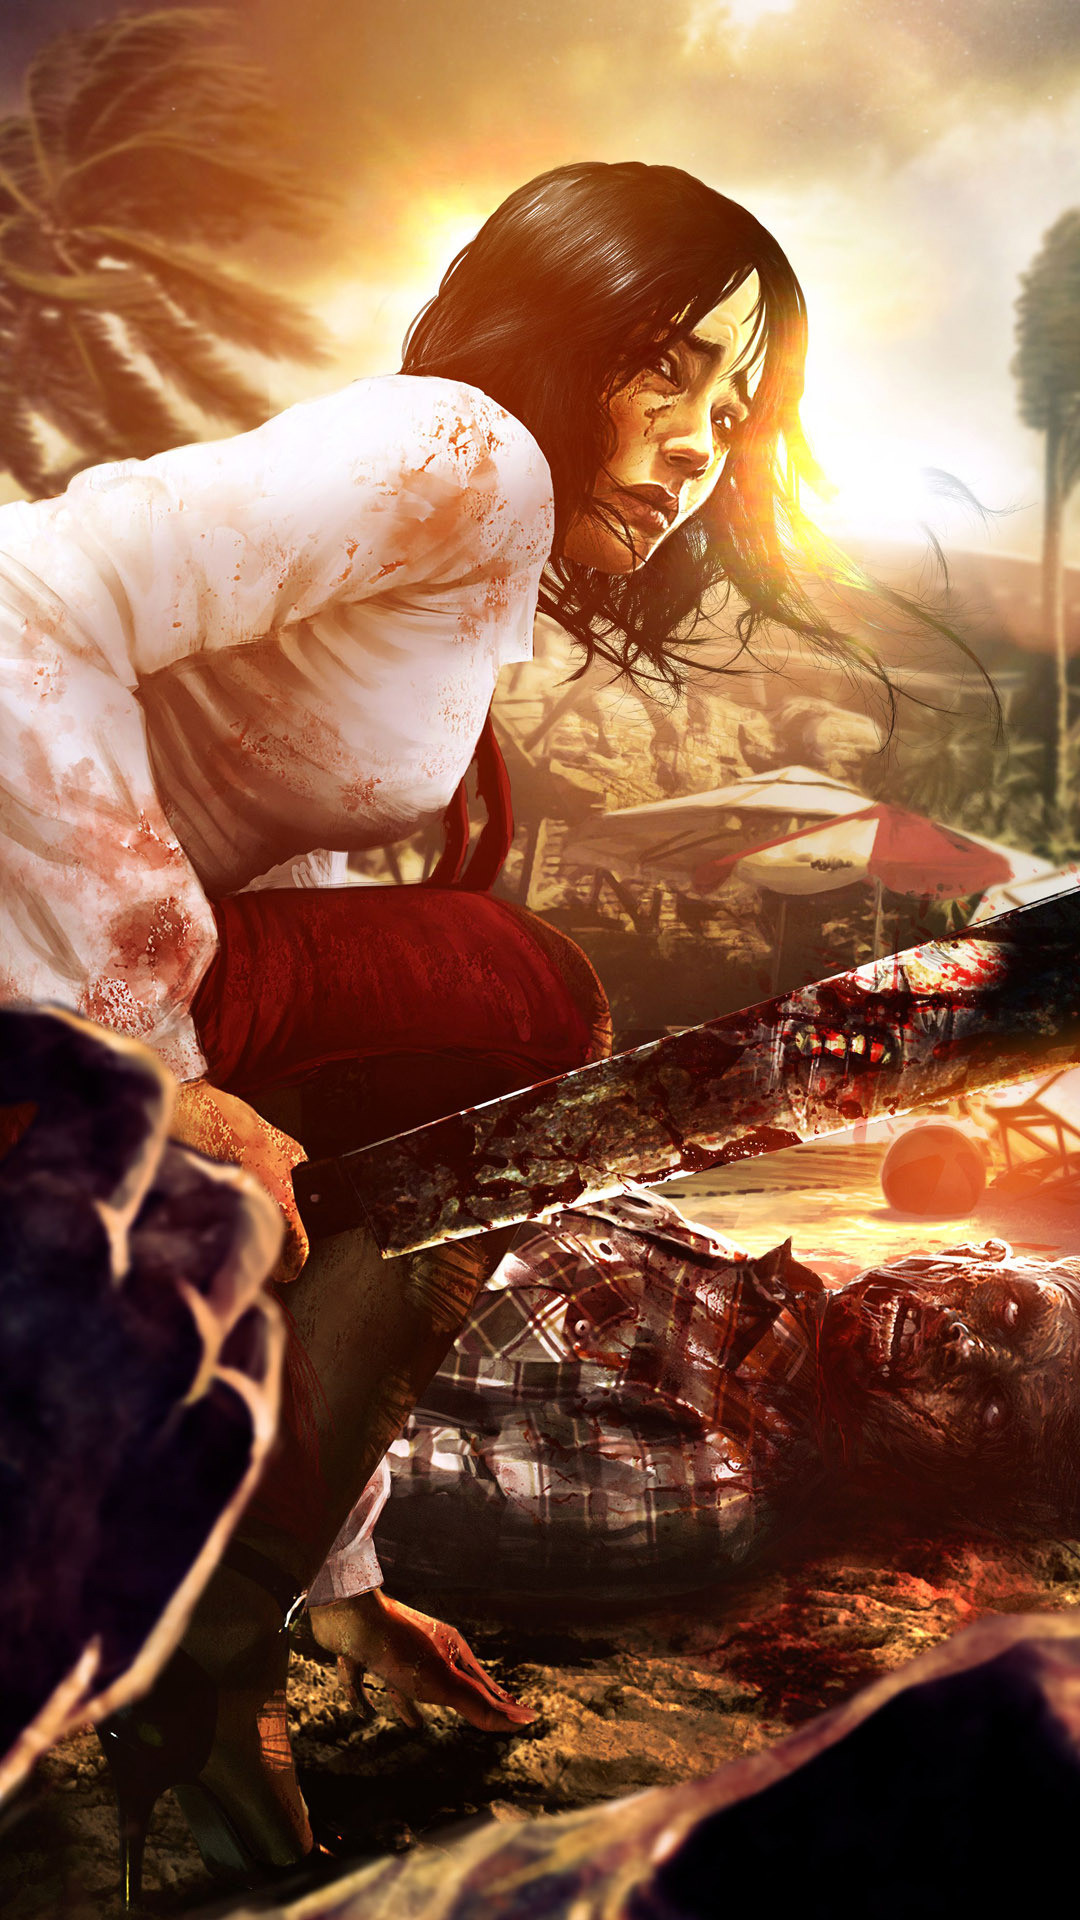 1080x1920 Dead Island Game Wallpaper HD Download For Pc Mobile